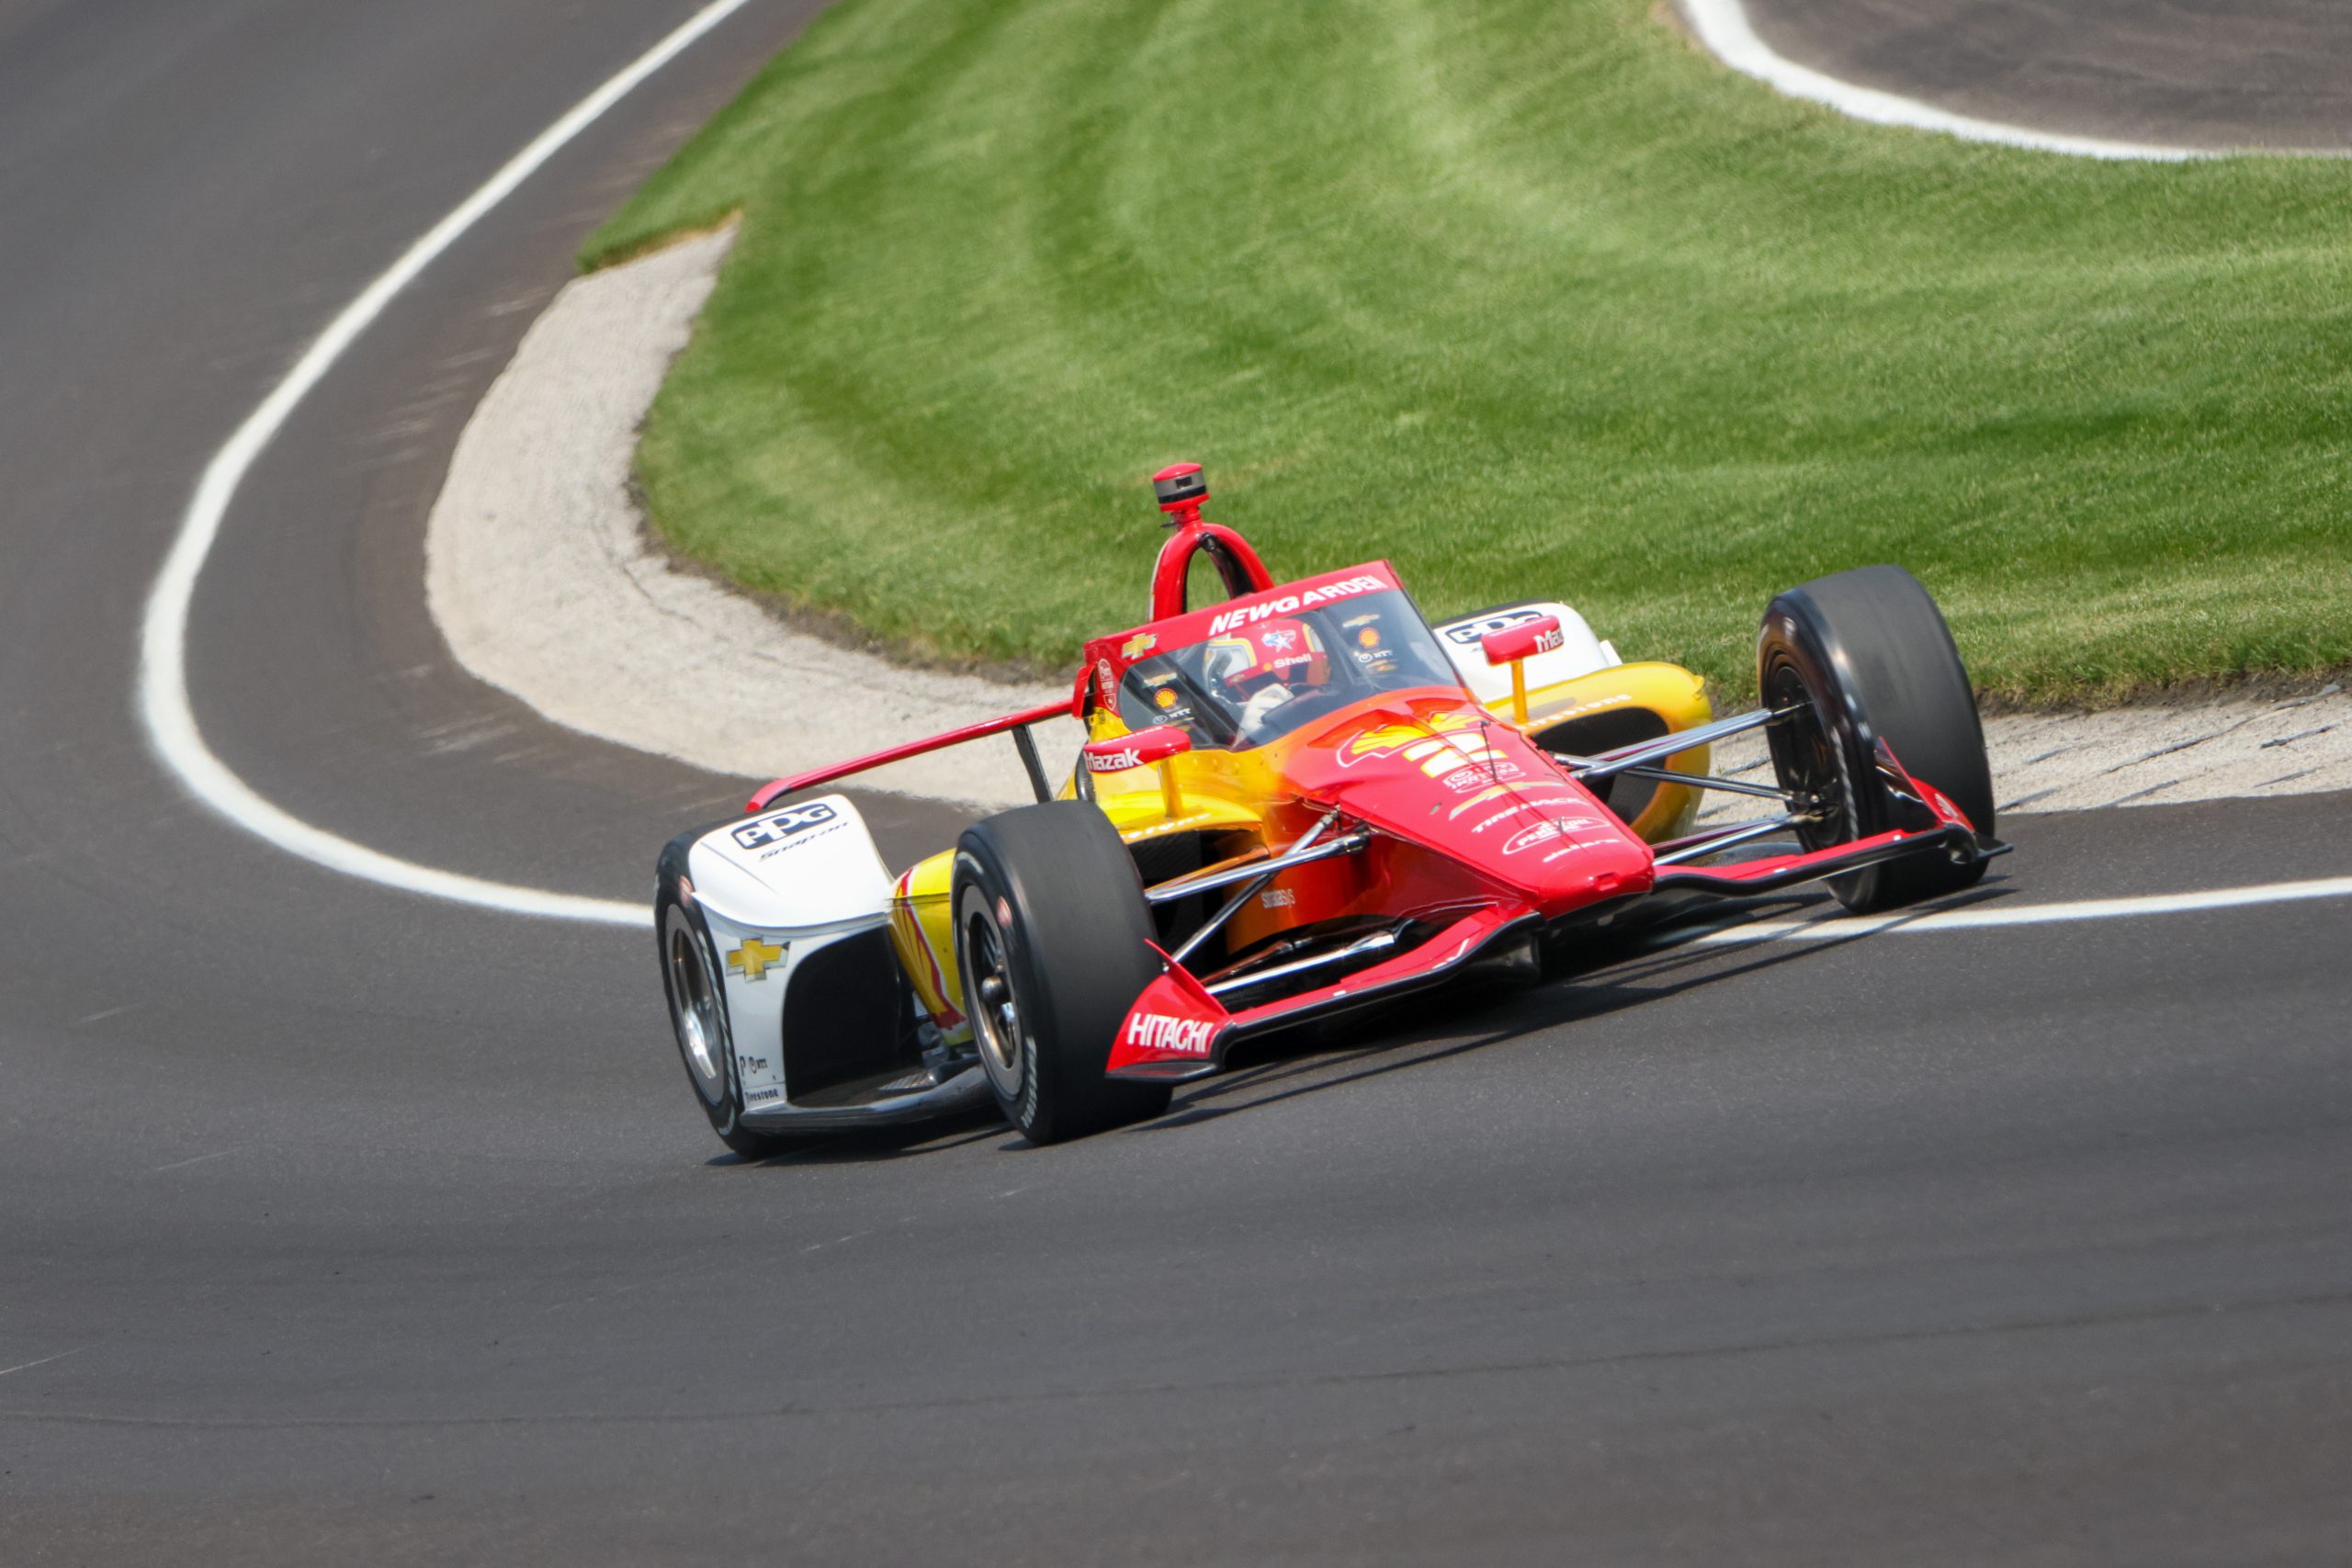 Newgarden has been solid in race trim at Indy. (Photo: Wayne Riegle | The Podium Finish)